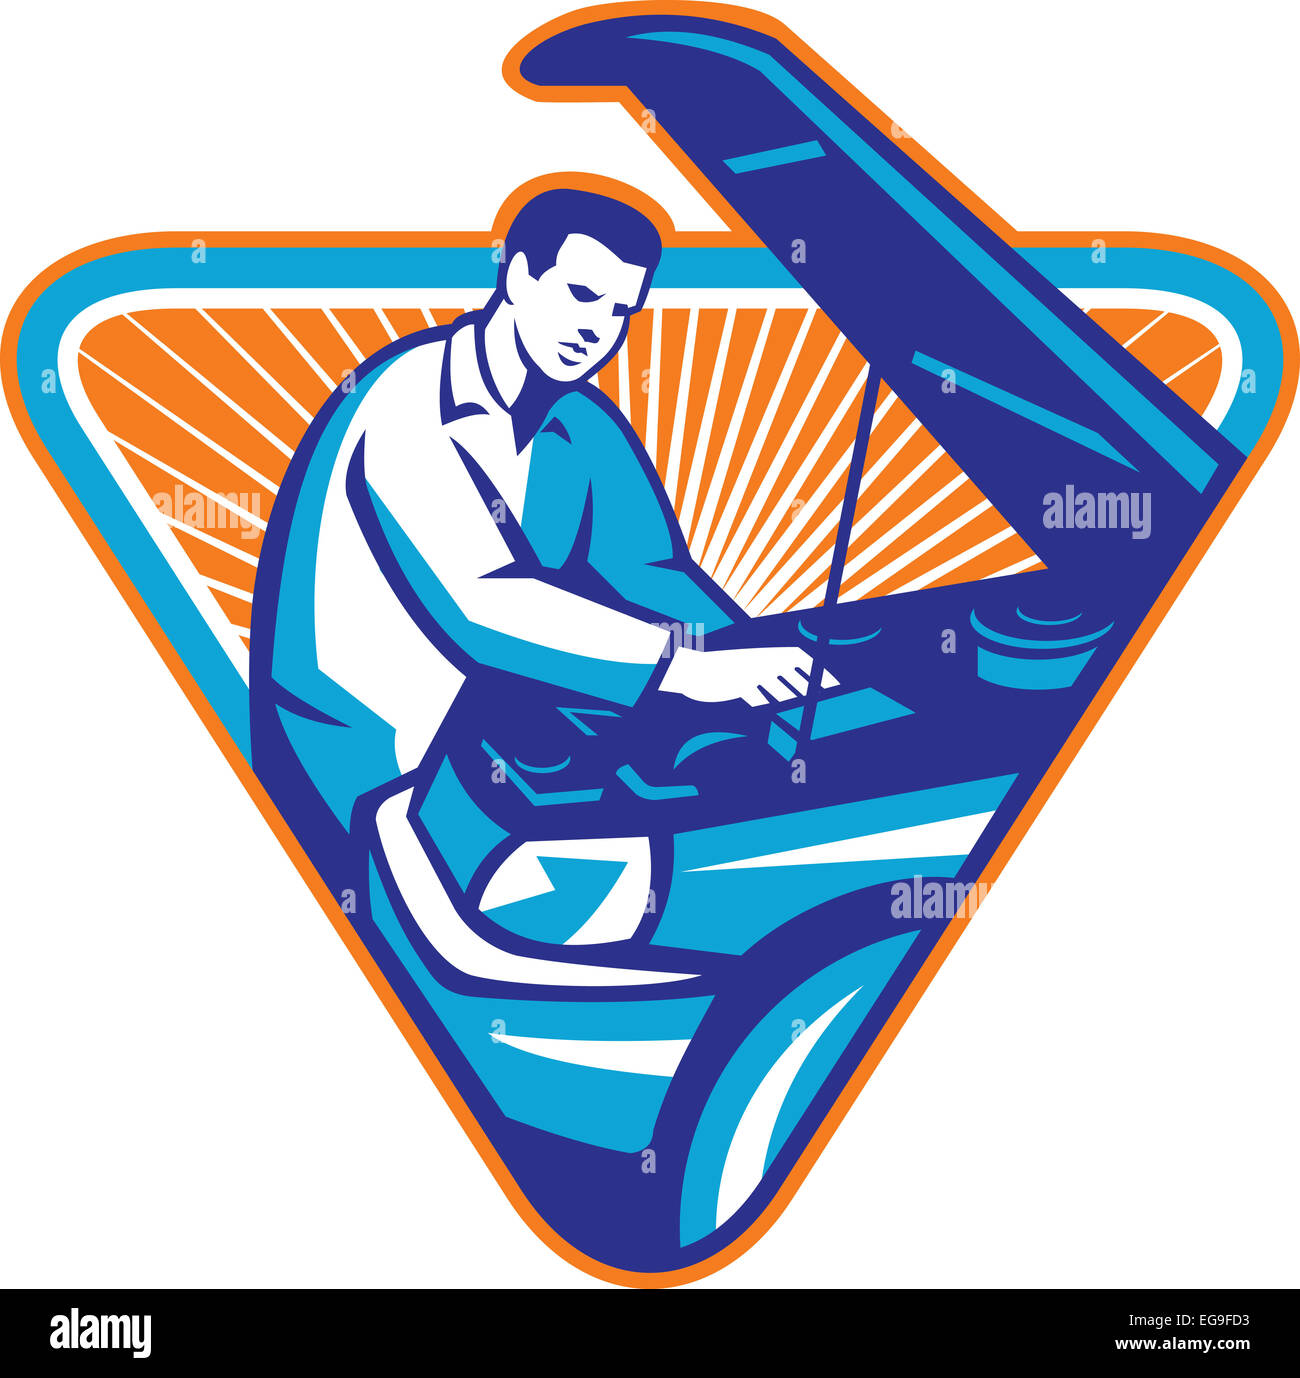 Illustration of an auto automobile mechanic repairing car engine with hood open set inside triangle with sunburst in the background done in retro style. Stock Photo